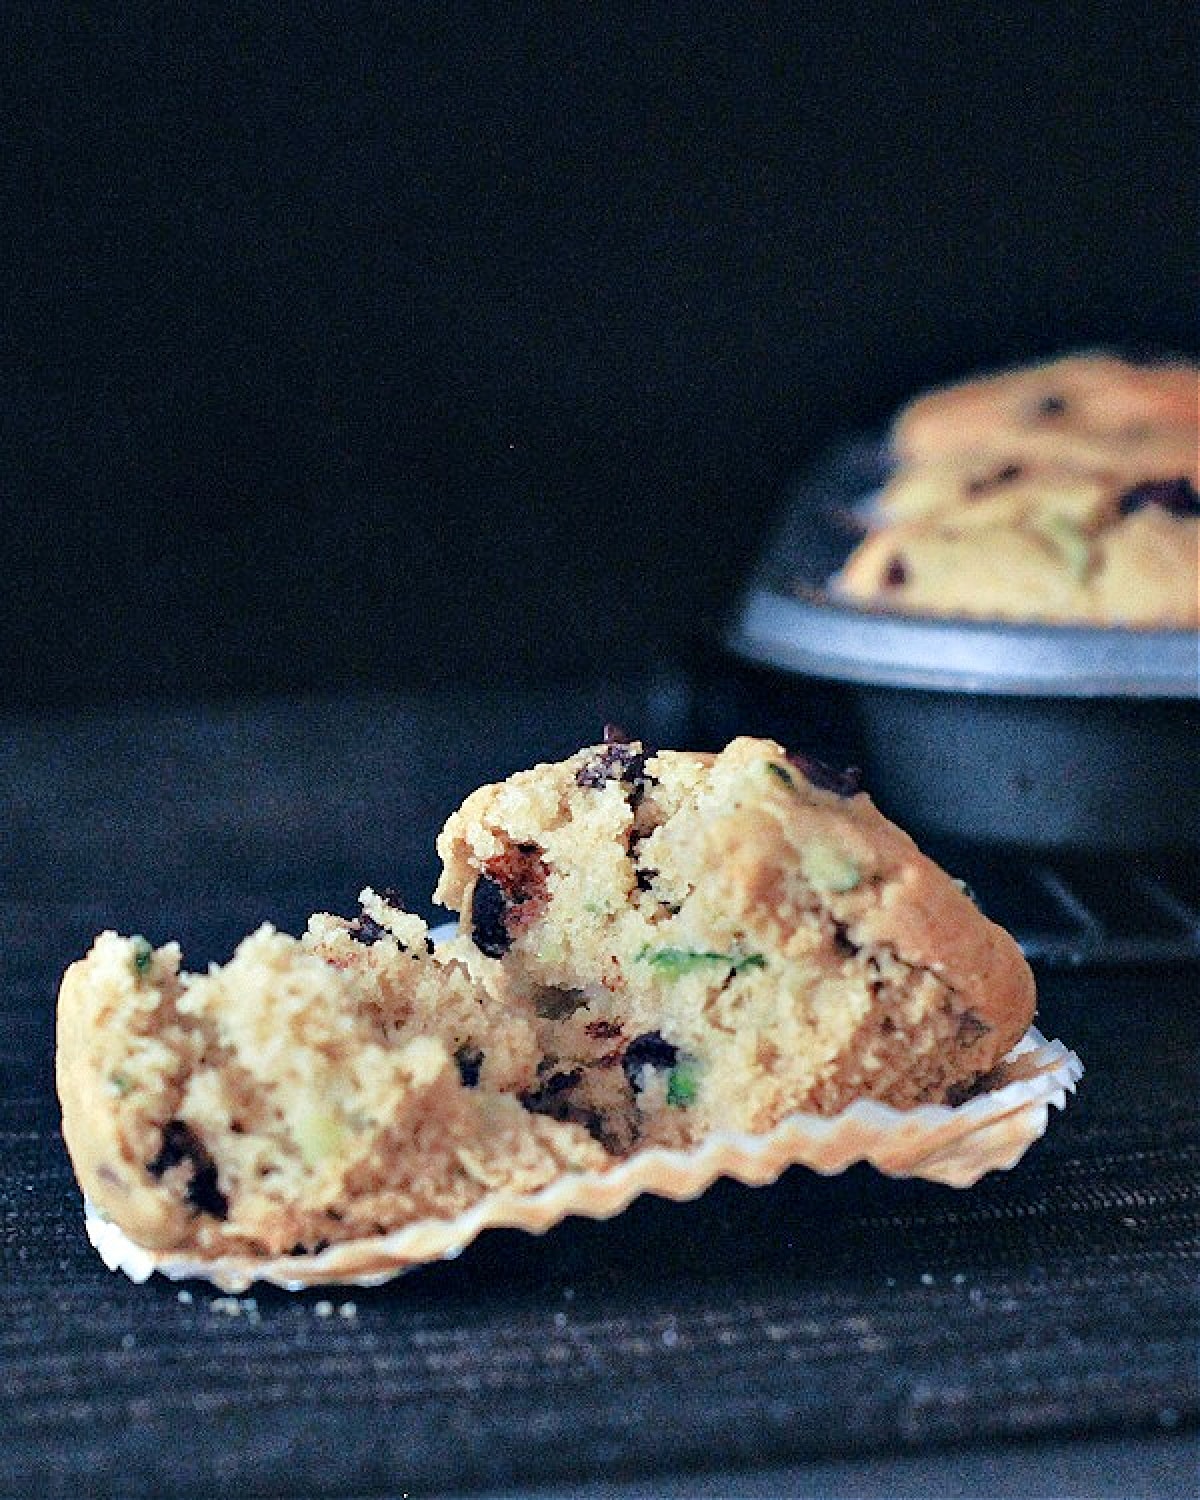 One chocolate chip zucchini muffin cut in half, sitting on a dark placemat against a black background, with a muffin tin full of muffins in background.